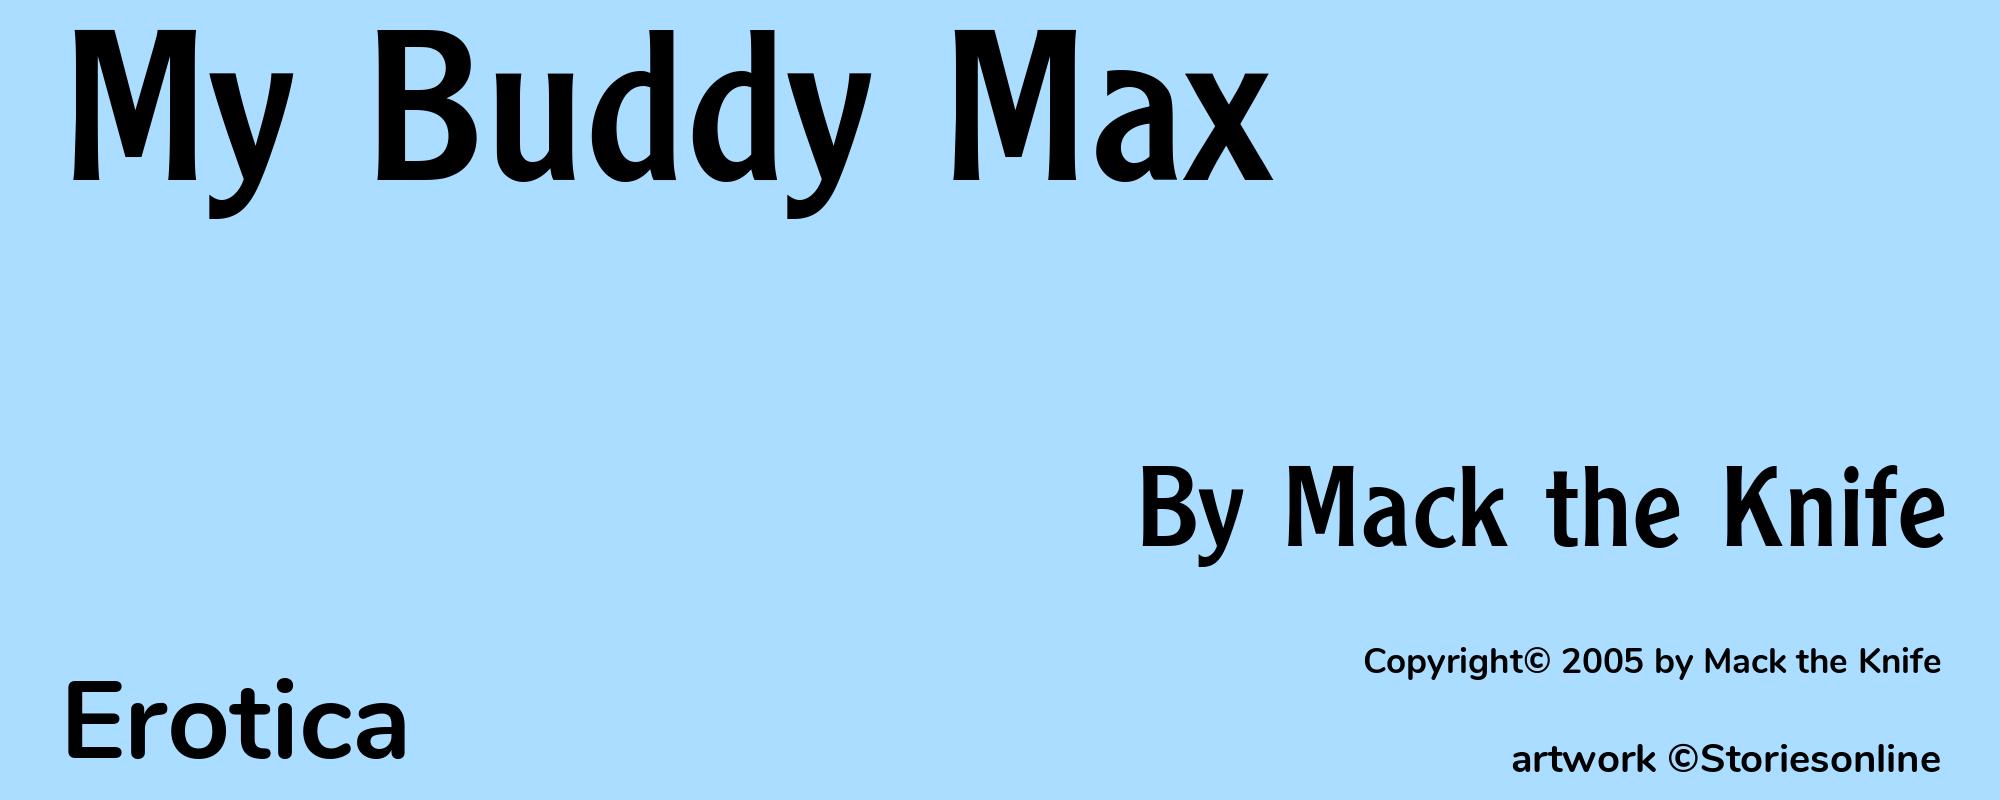 My Buddy Max - Cover